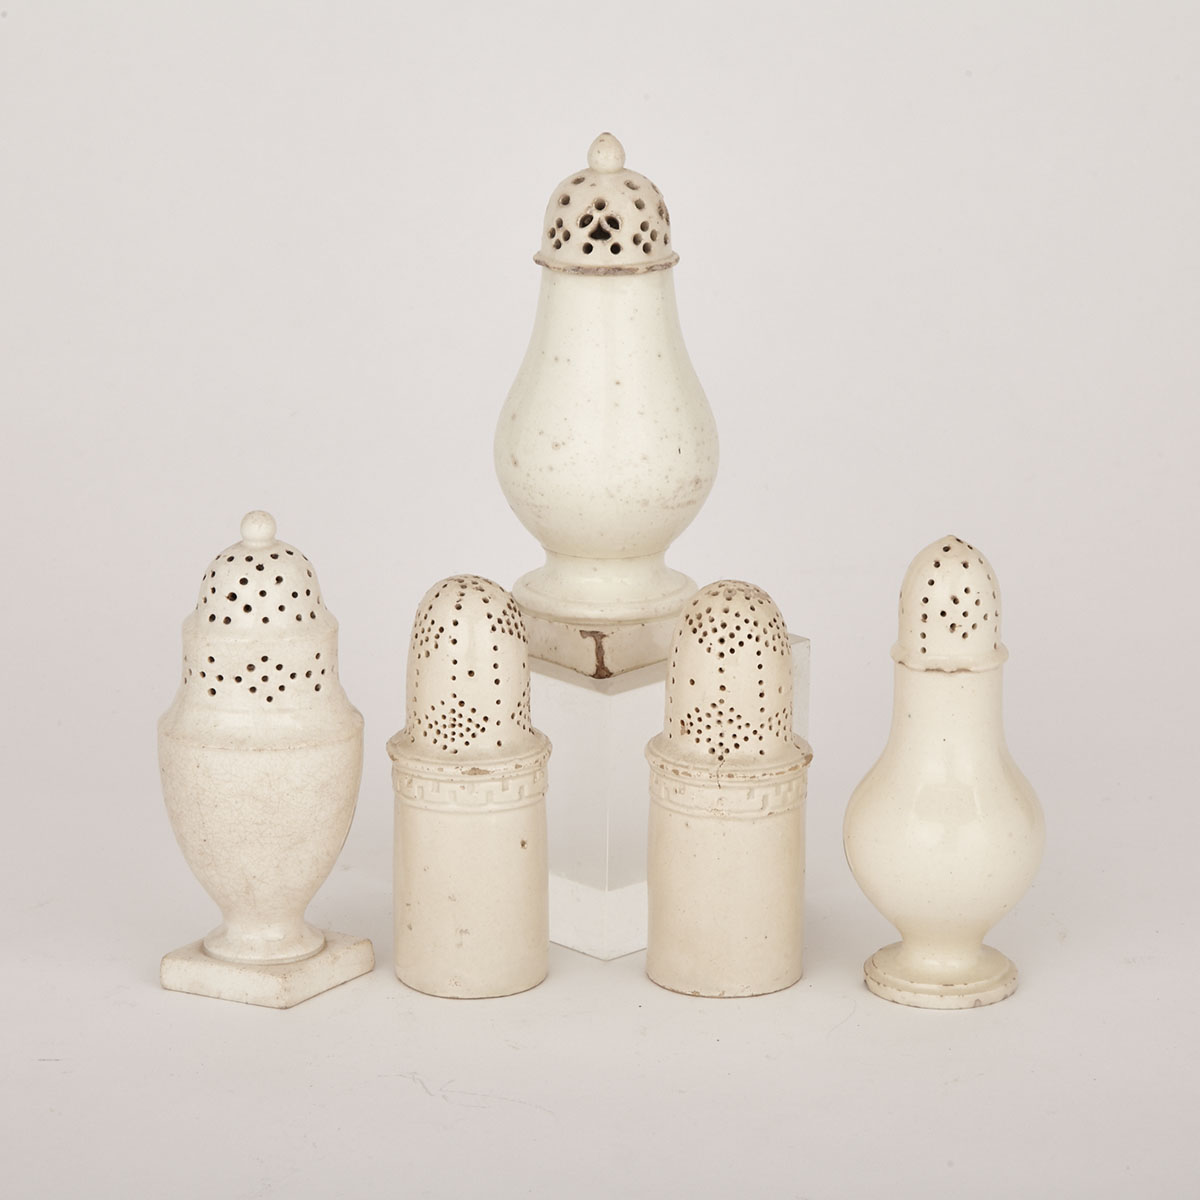 Collection of Five English Leeds Creamware Pottery Sugar Casters, late 18th century